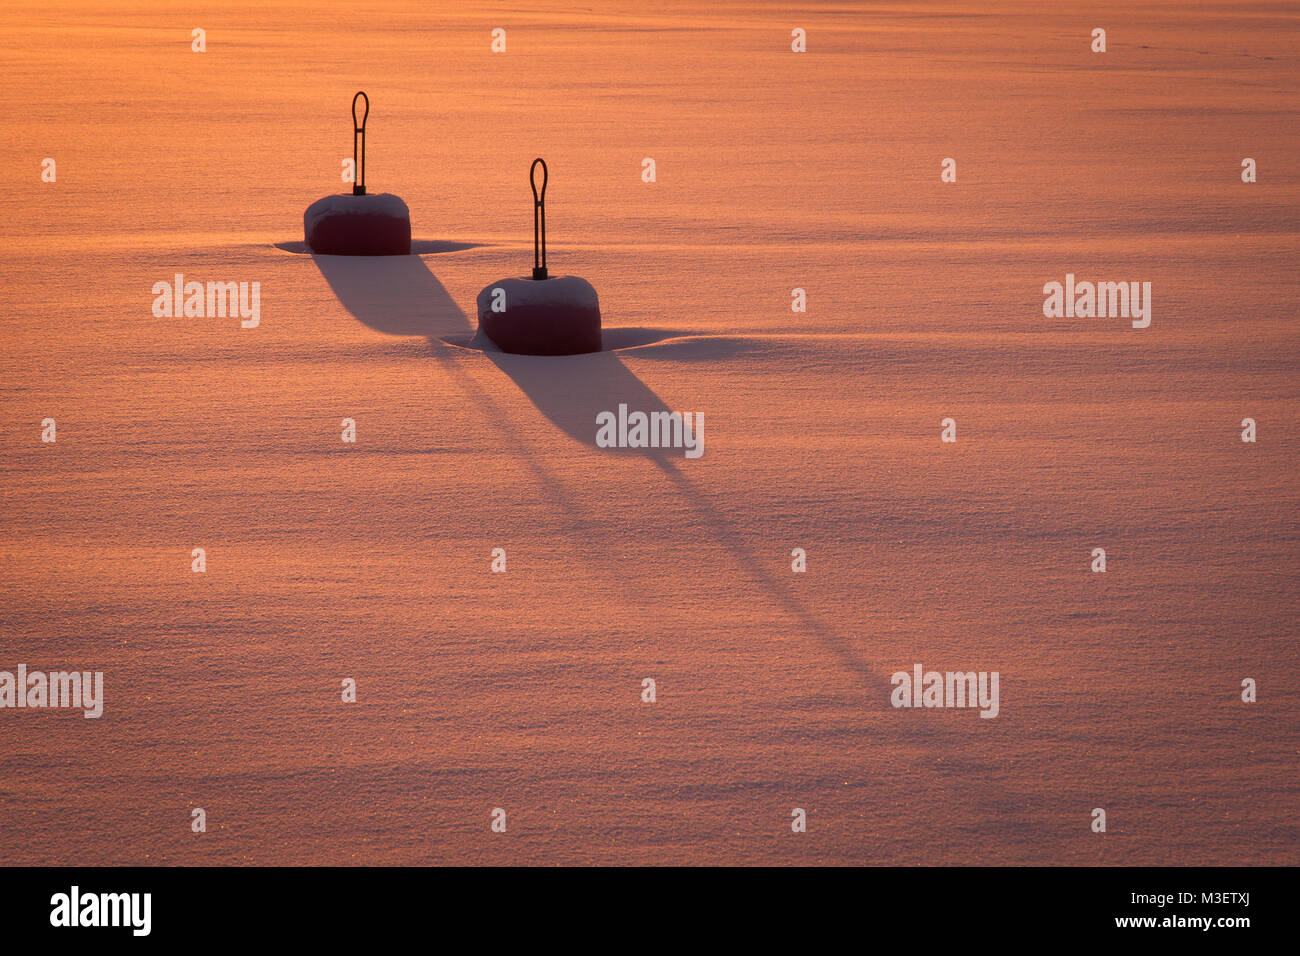 Winter image with two buoys in the frozen ocean. Stock Photo